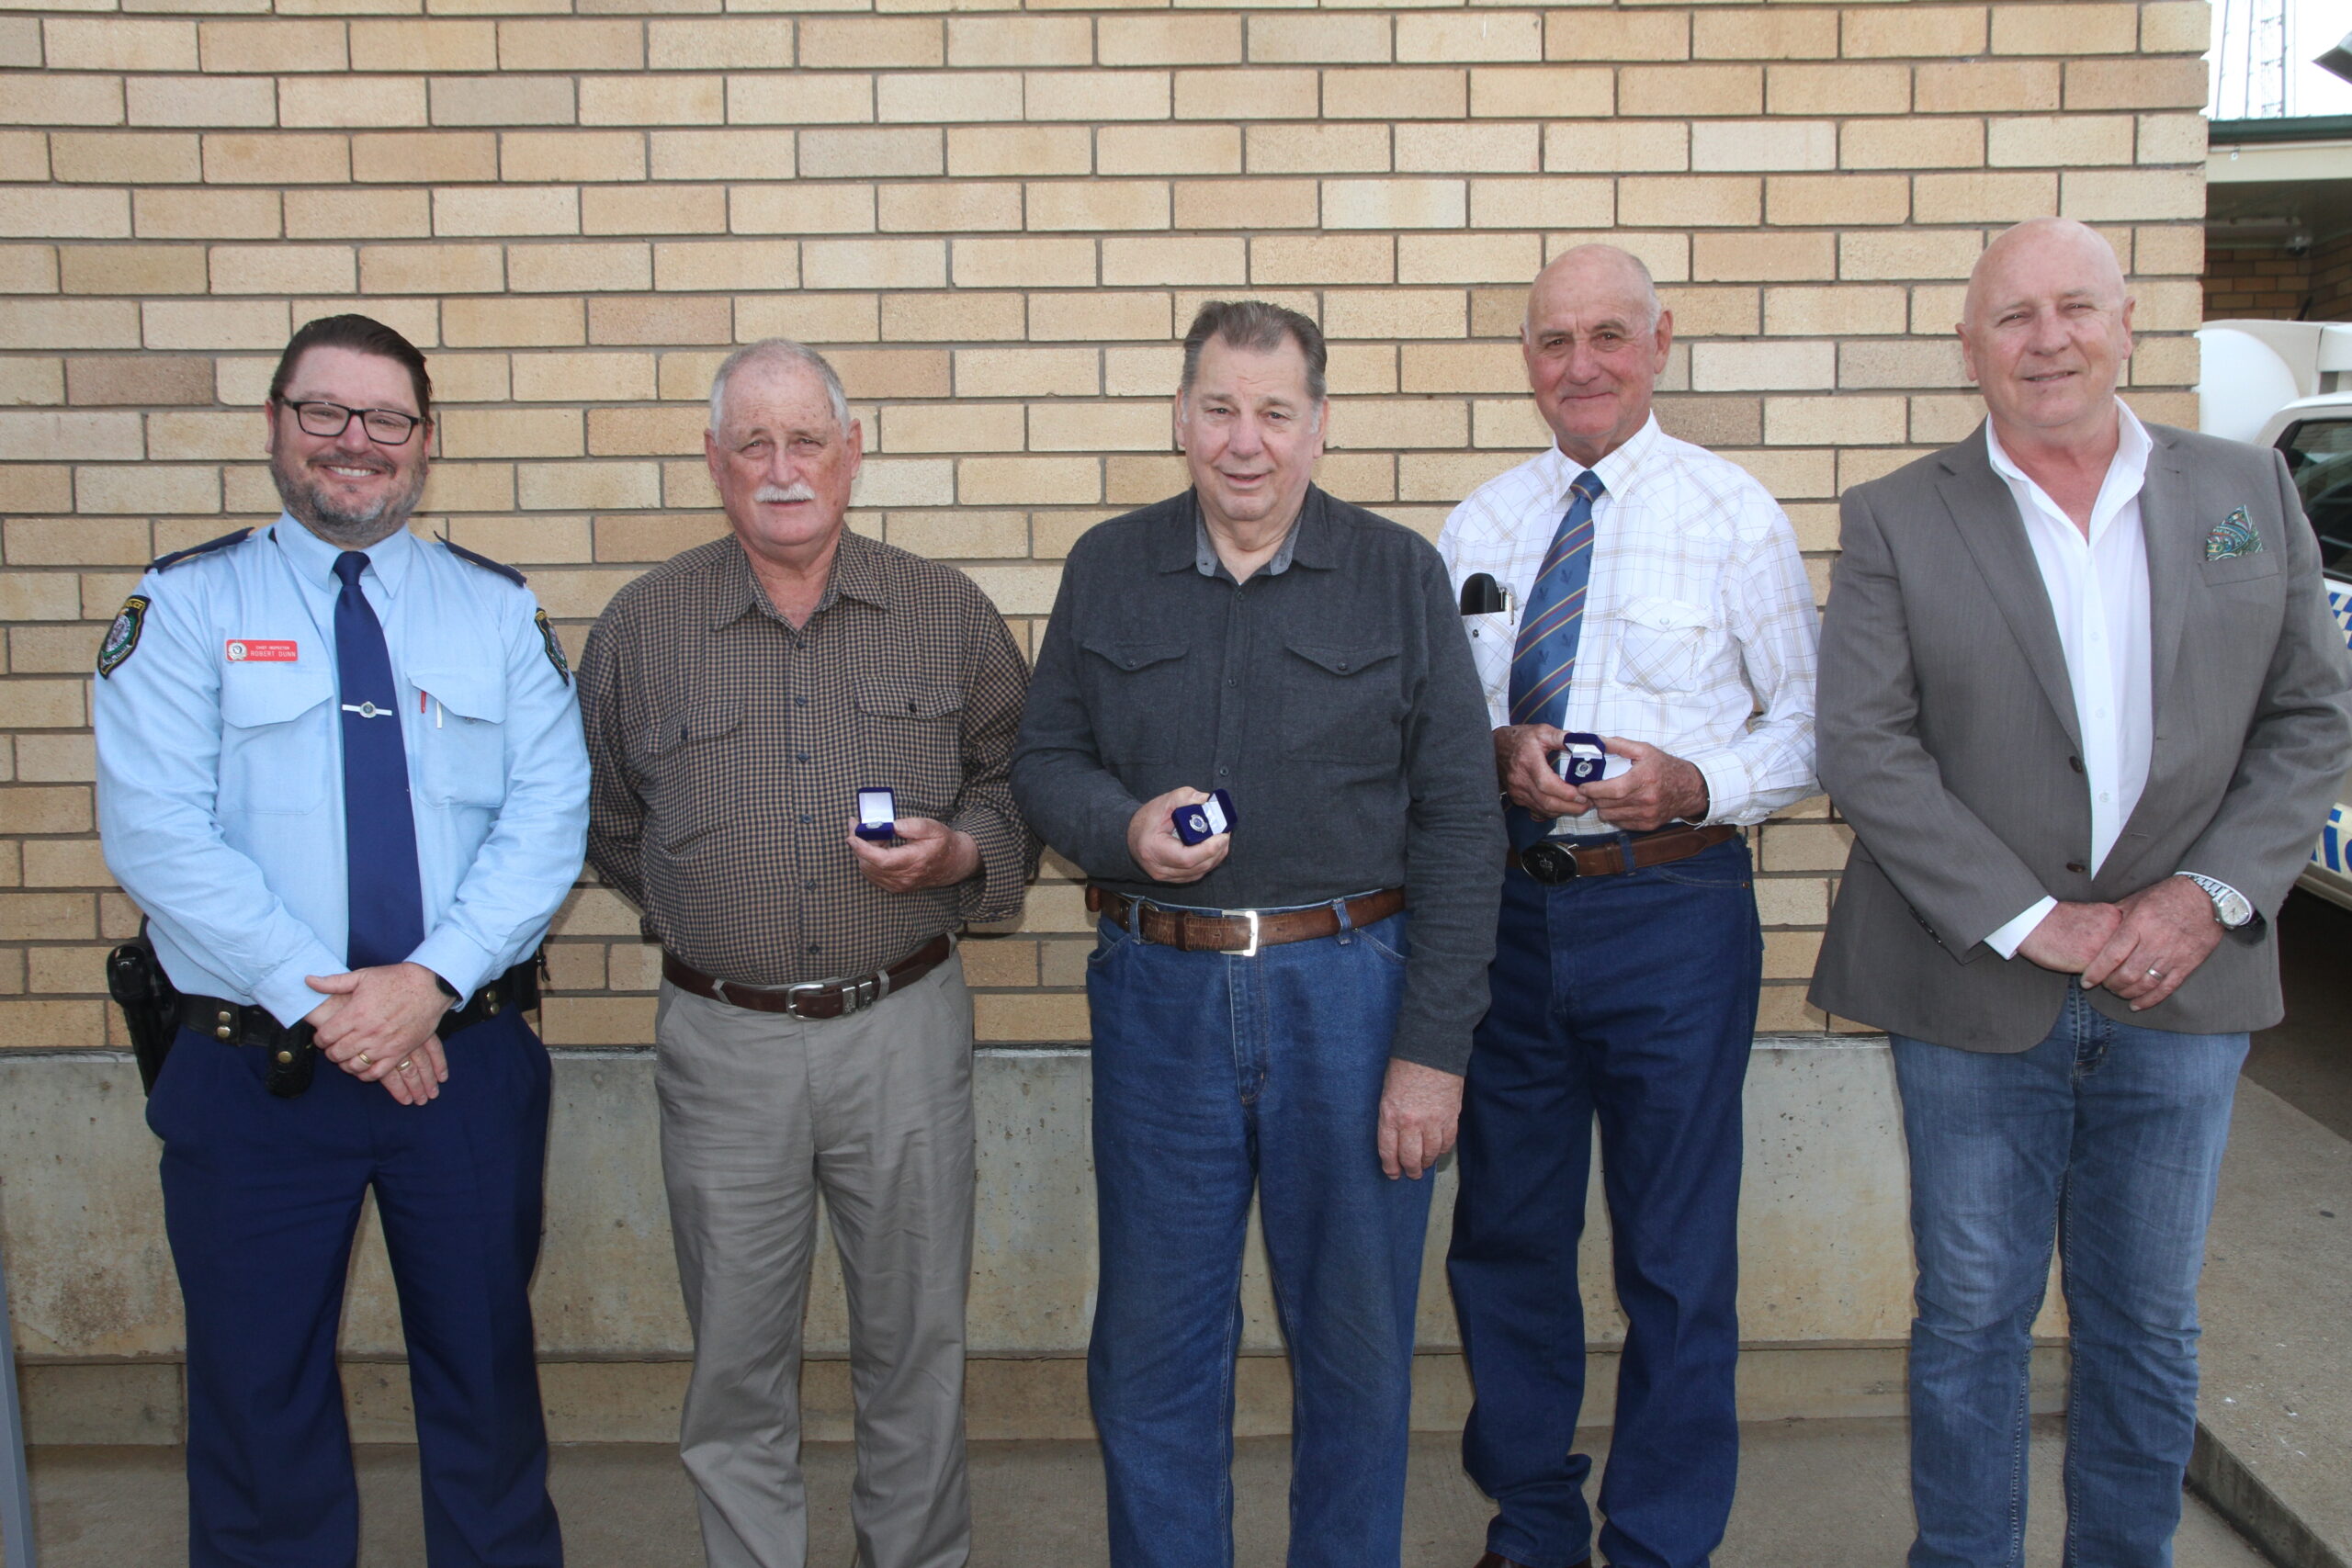 Retired police officers thanked for service in Narrabri